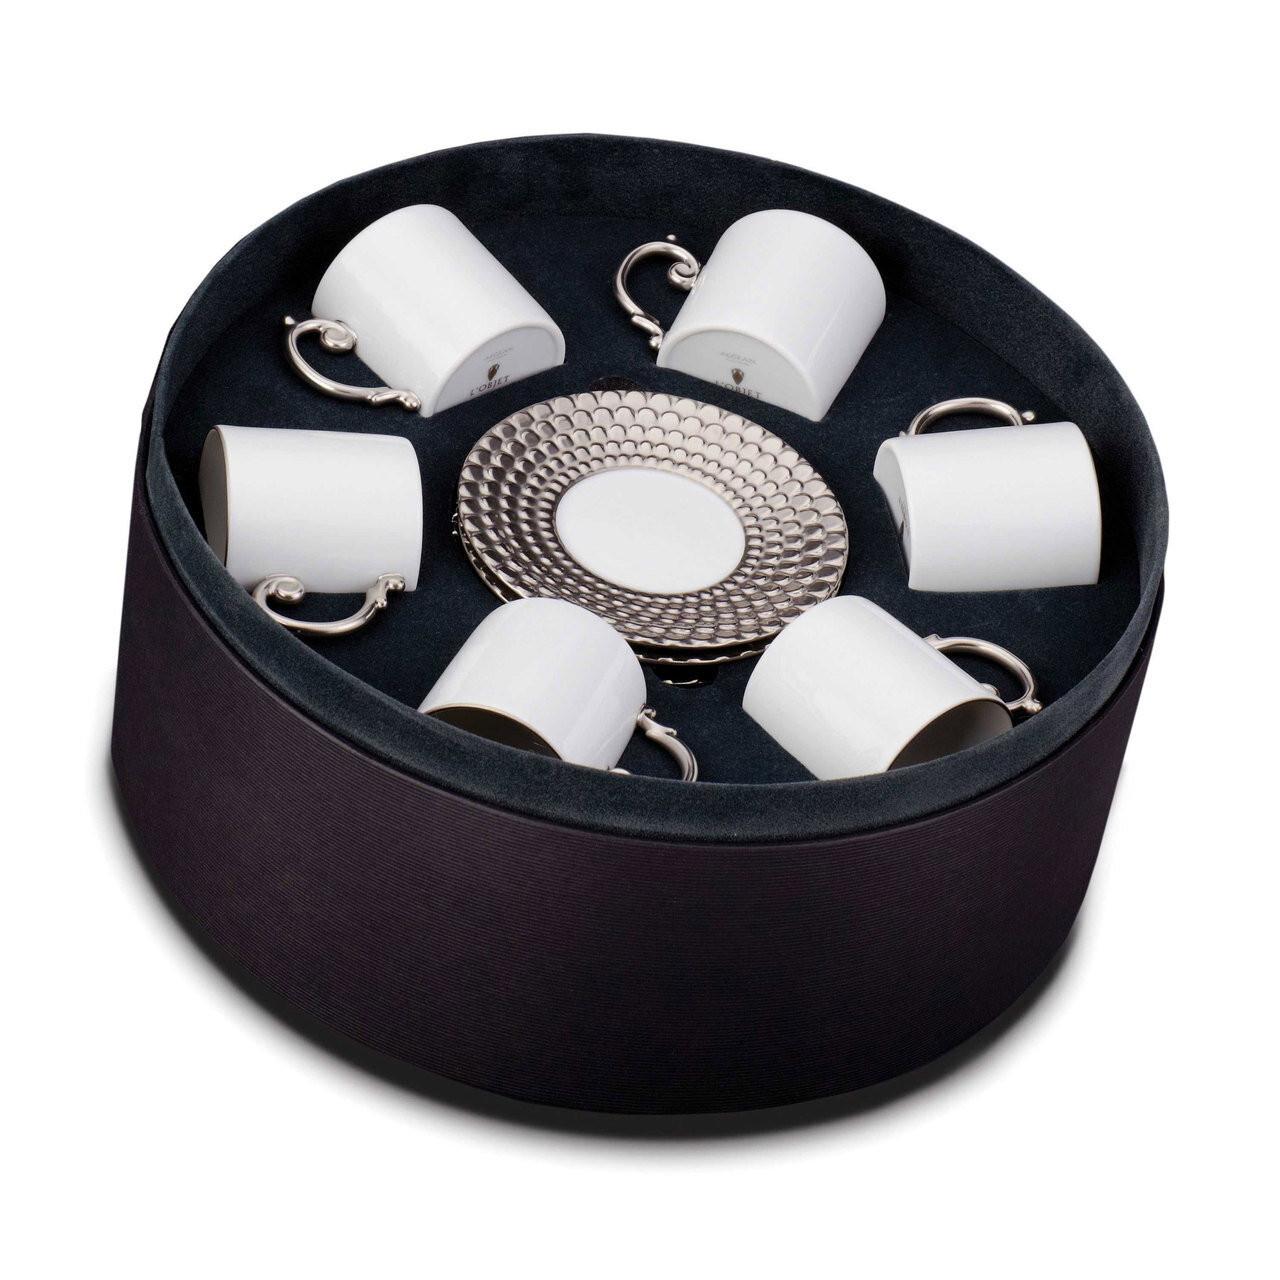 L'Objet Aegean Espresso Cup and Saucer Gift Box of 6 Platinum